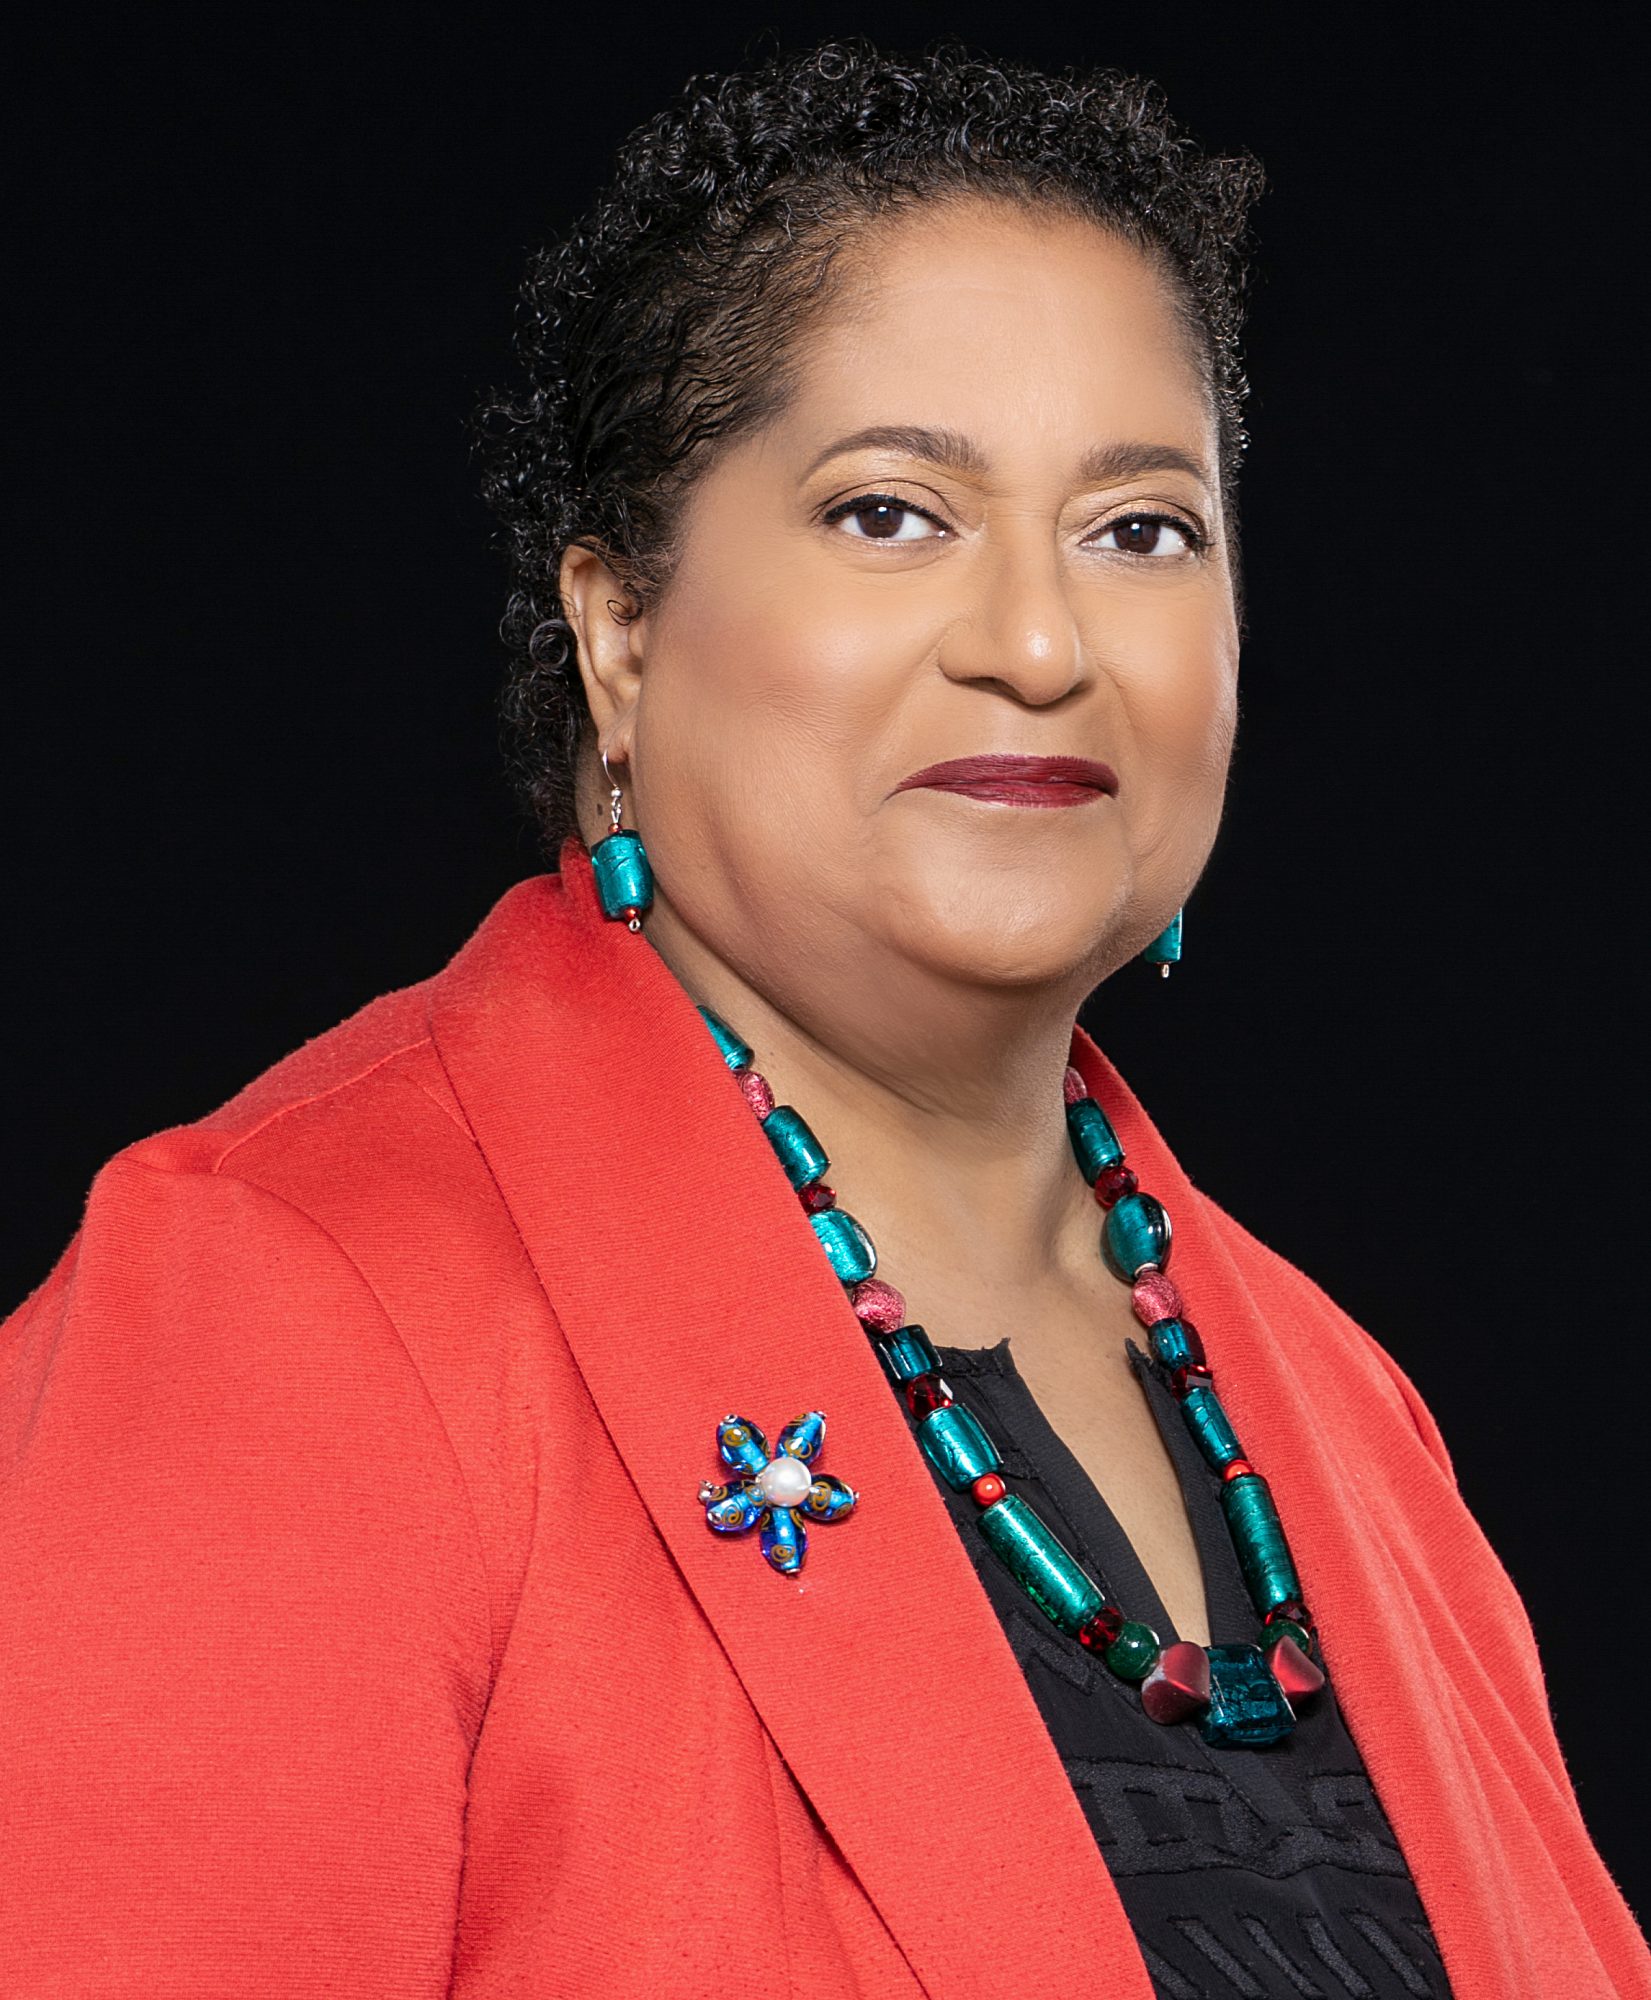 Marcela Howell is president and CEO of In Our Own Voice: National Black Women’s Reproductive Justice Agenda. Follow her work on Twitter at @BlackWomensRJ.